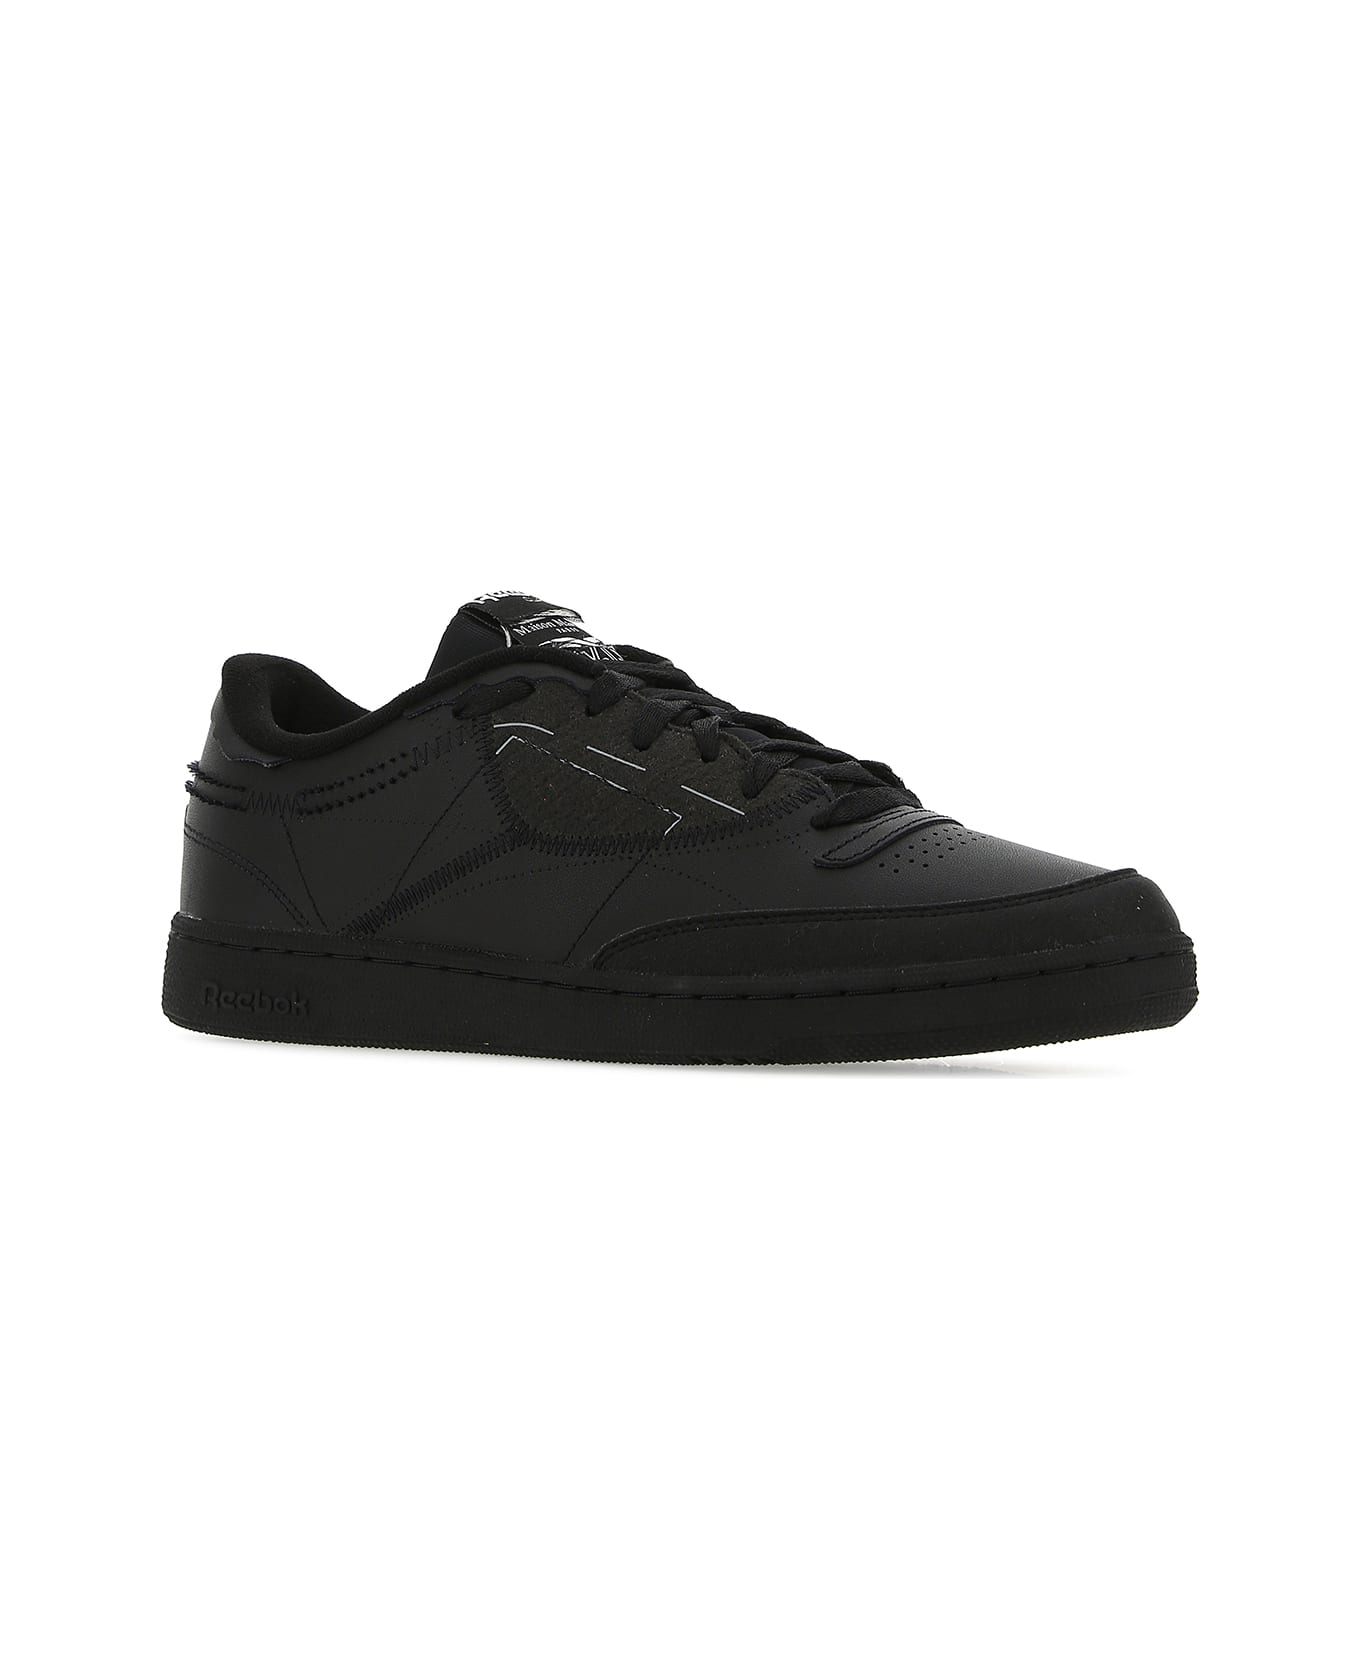 Reebok Black Leather And Fabric Project 0 Cc Memory Of Sneakers - BLACKFTWWHTBLACK